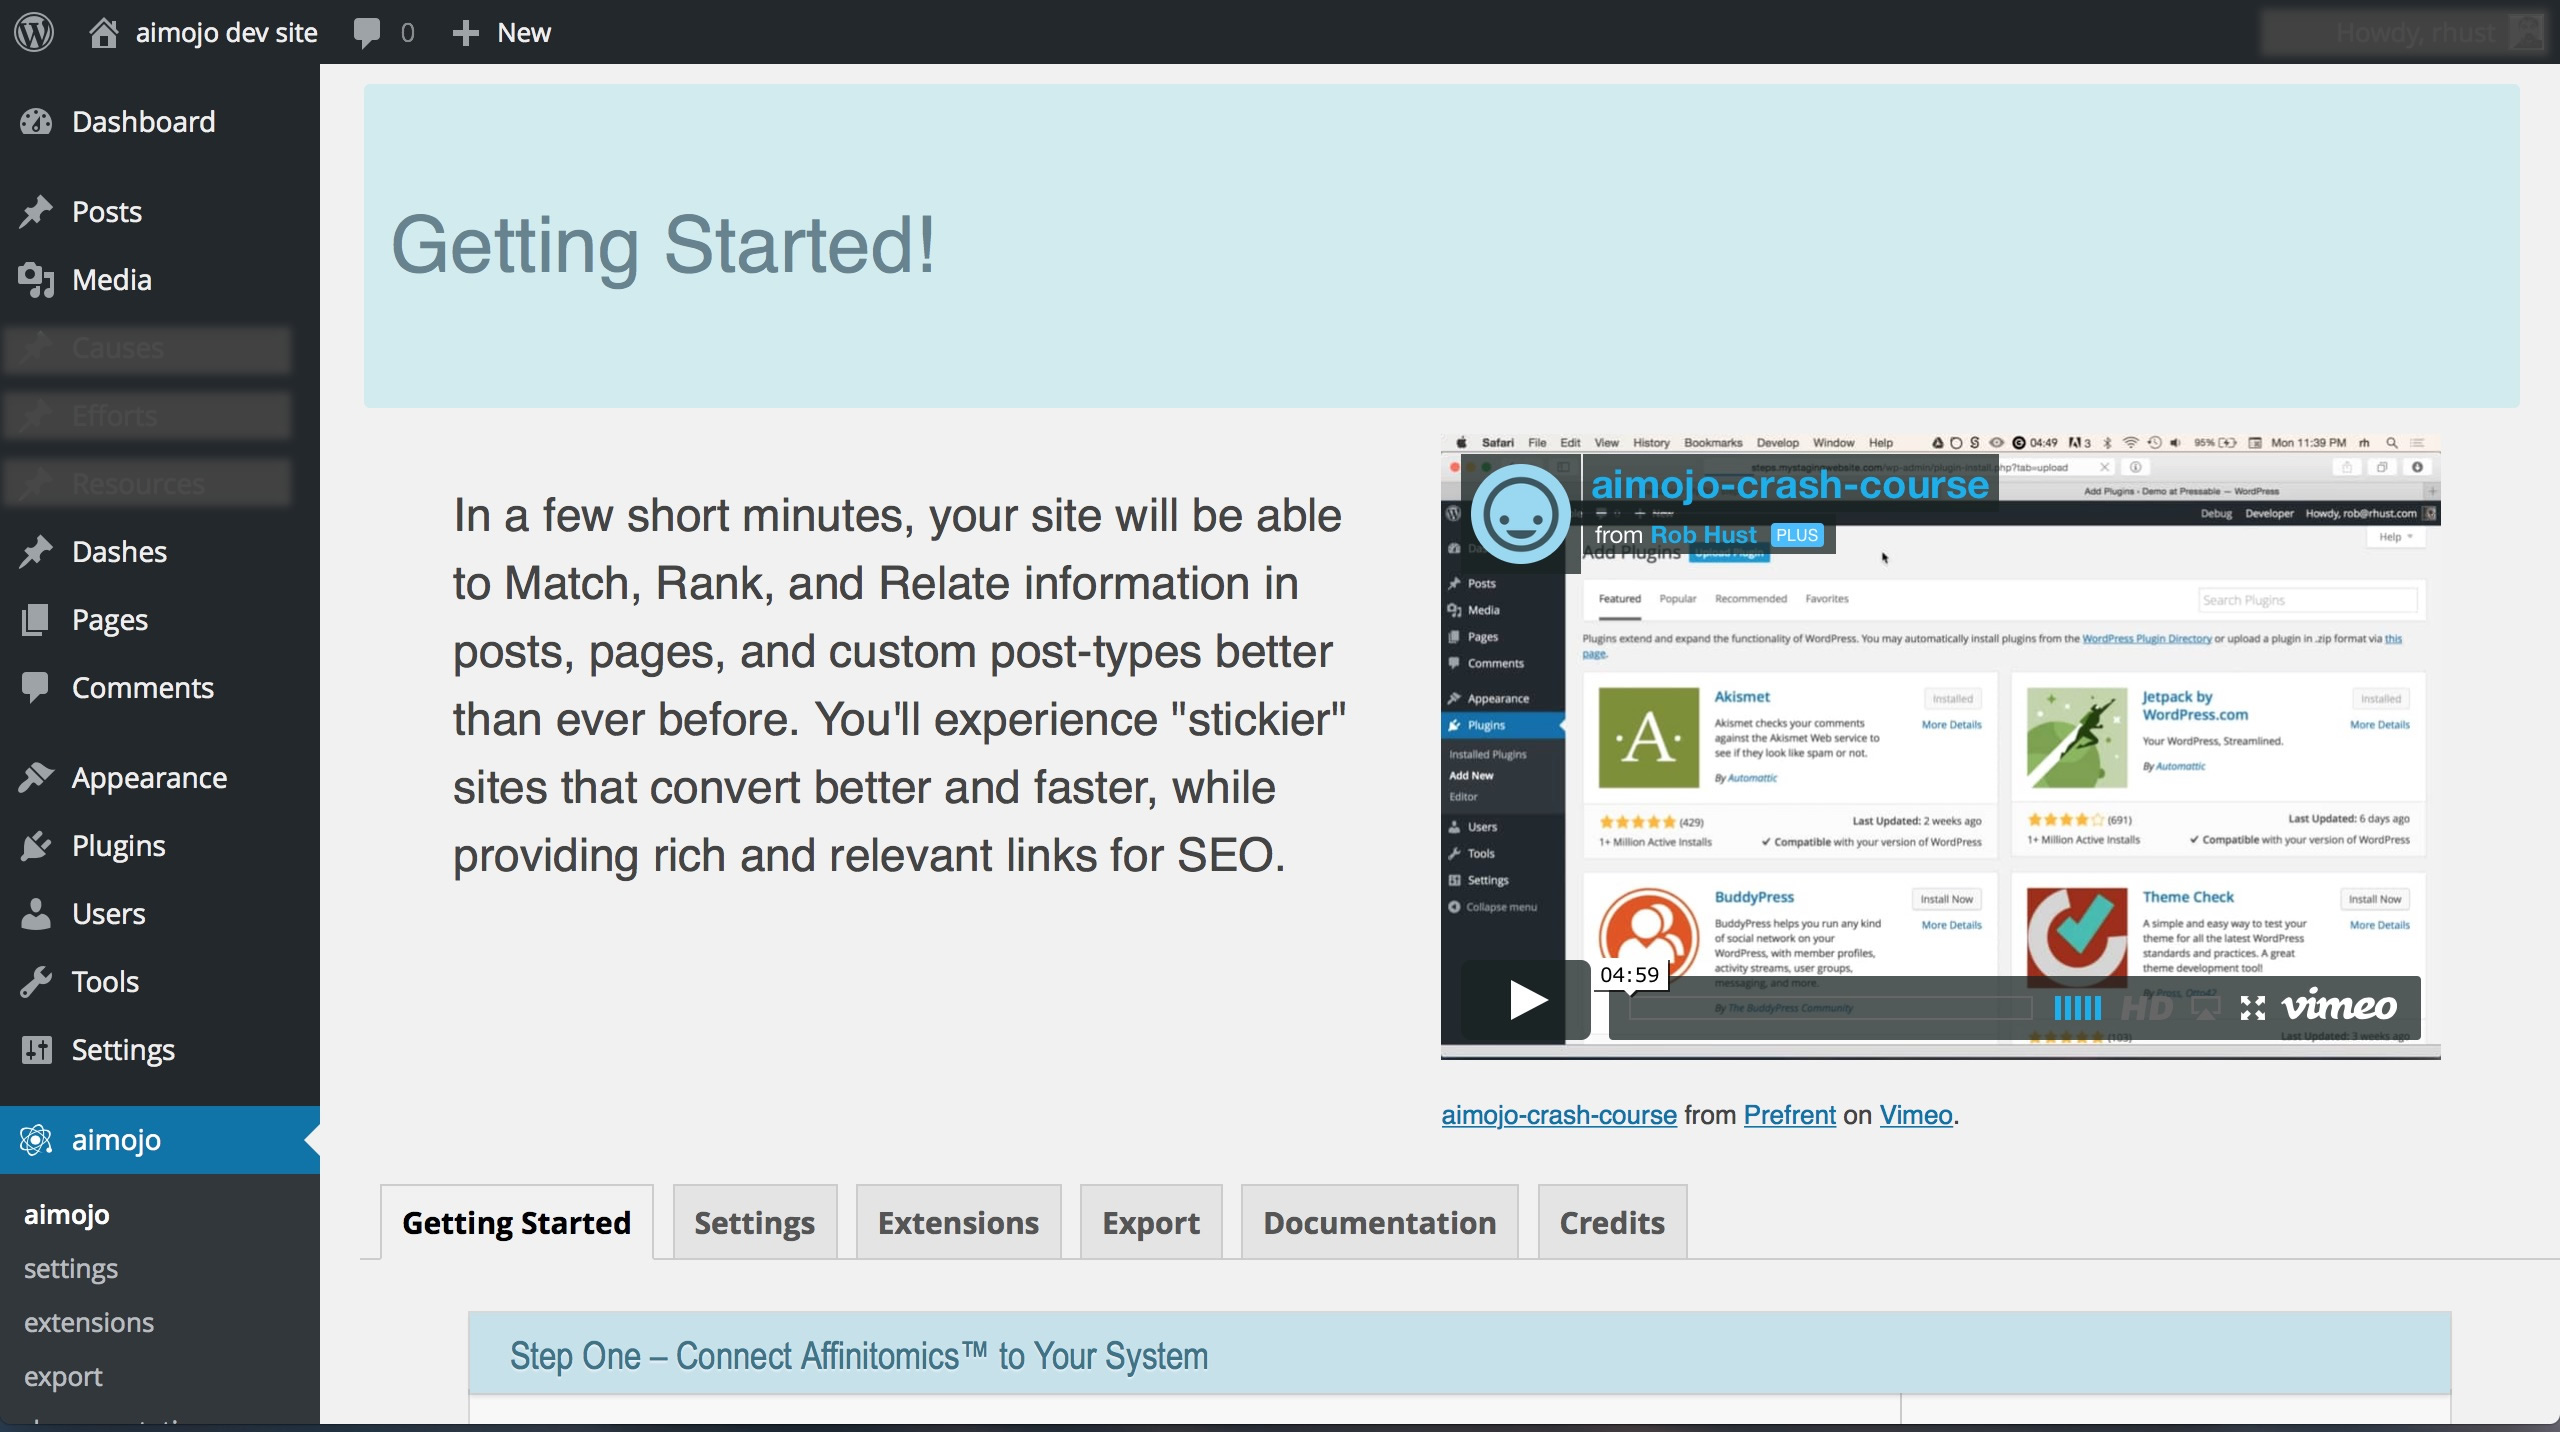 This shows the primary start page for aimojo, The tabbed interface makes finding what you need easy.